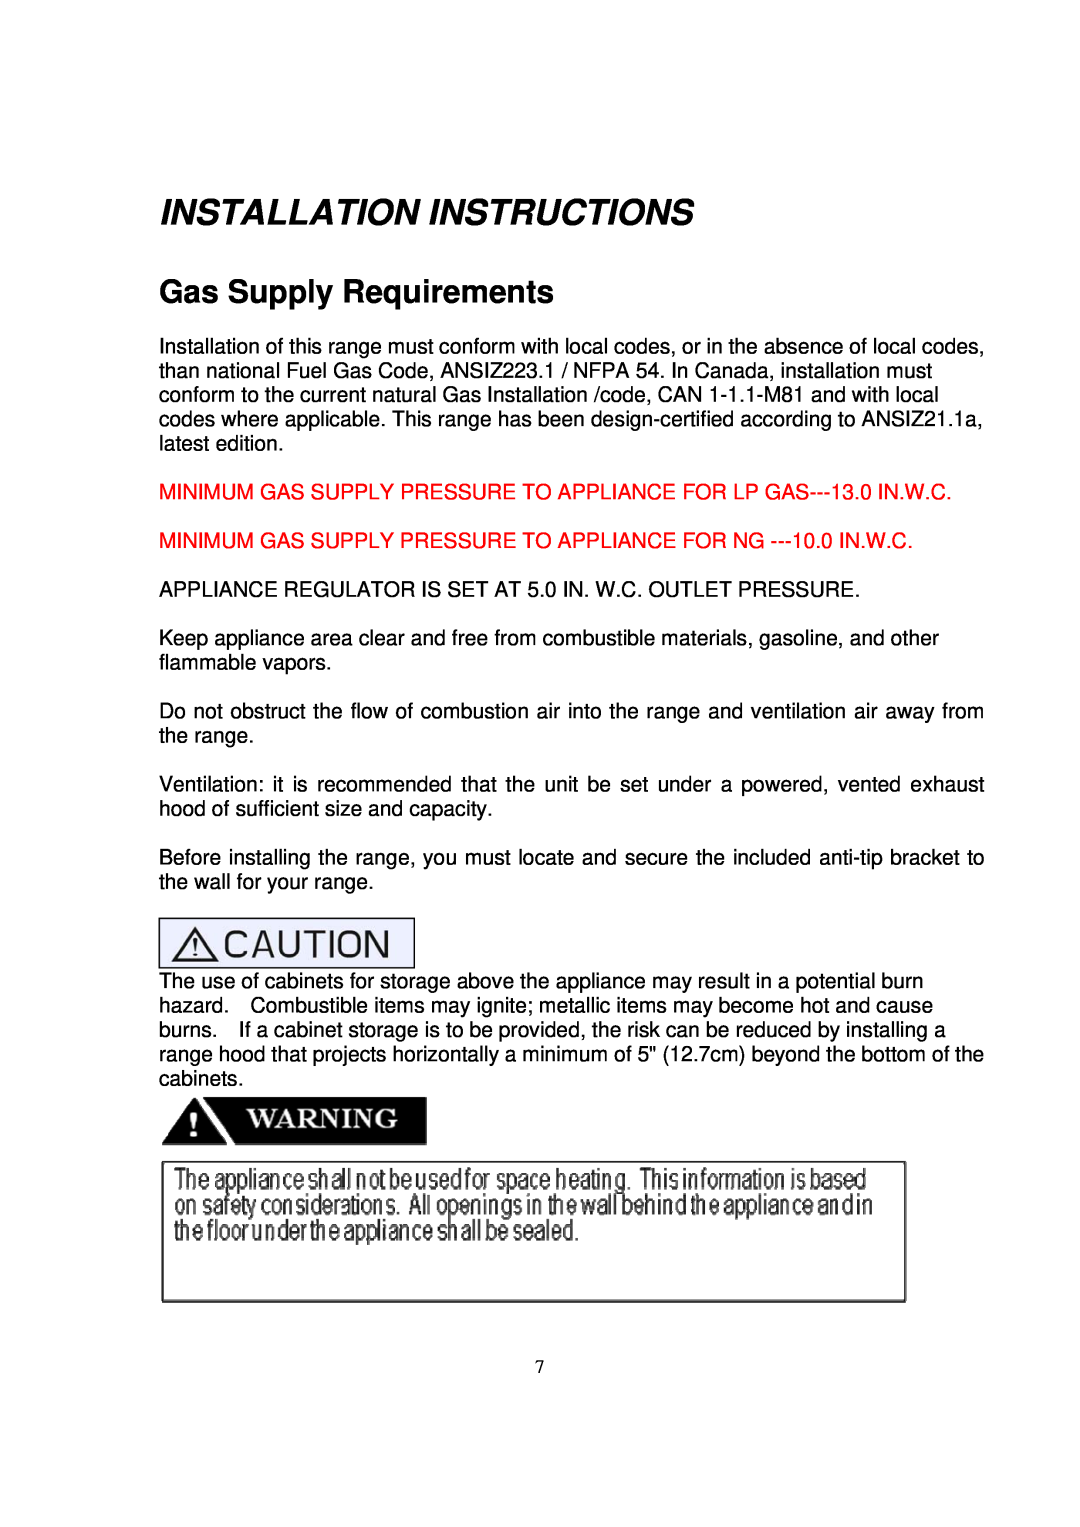 NXR BX3031, DRGB4801, BX3062 manual Gas Supply Requirements, Installation Instructions 